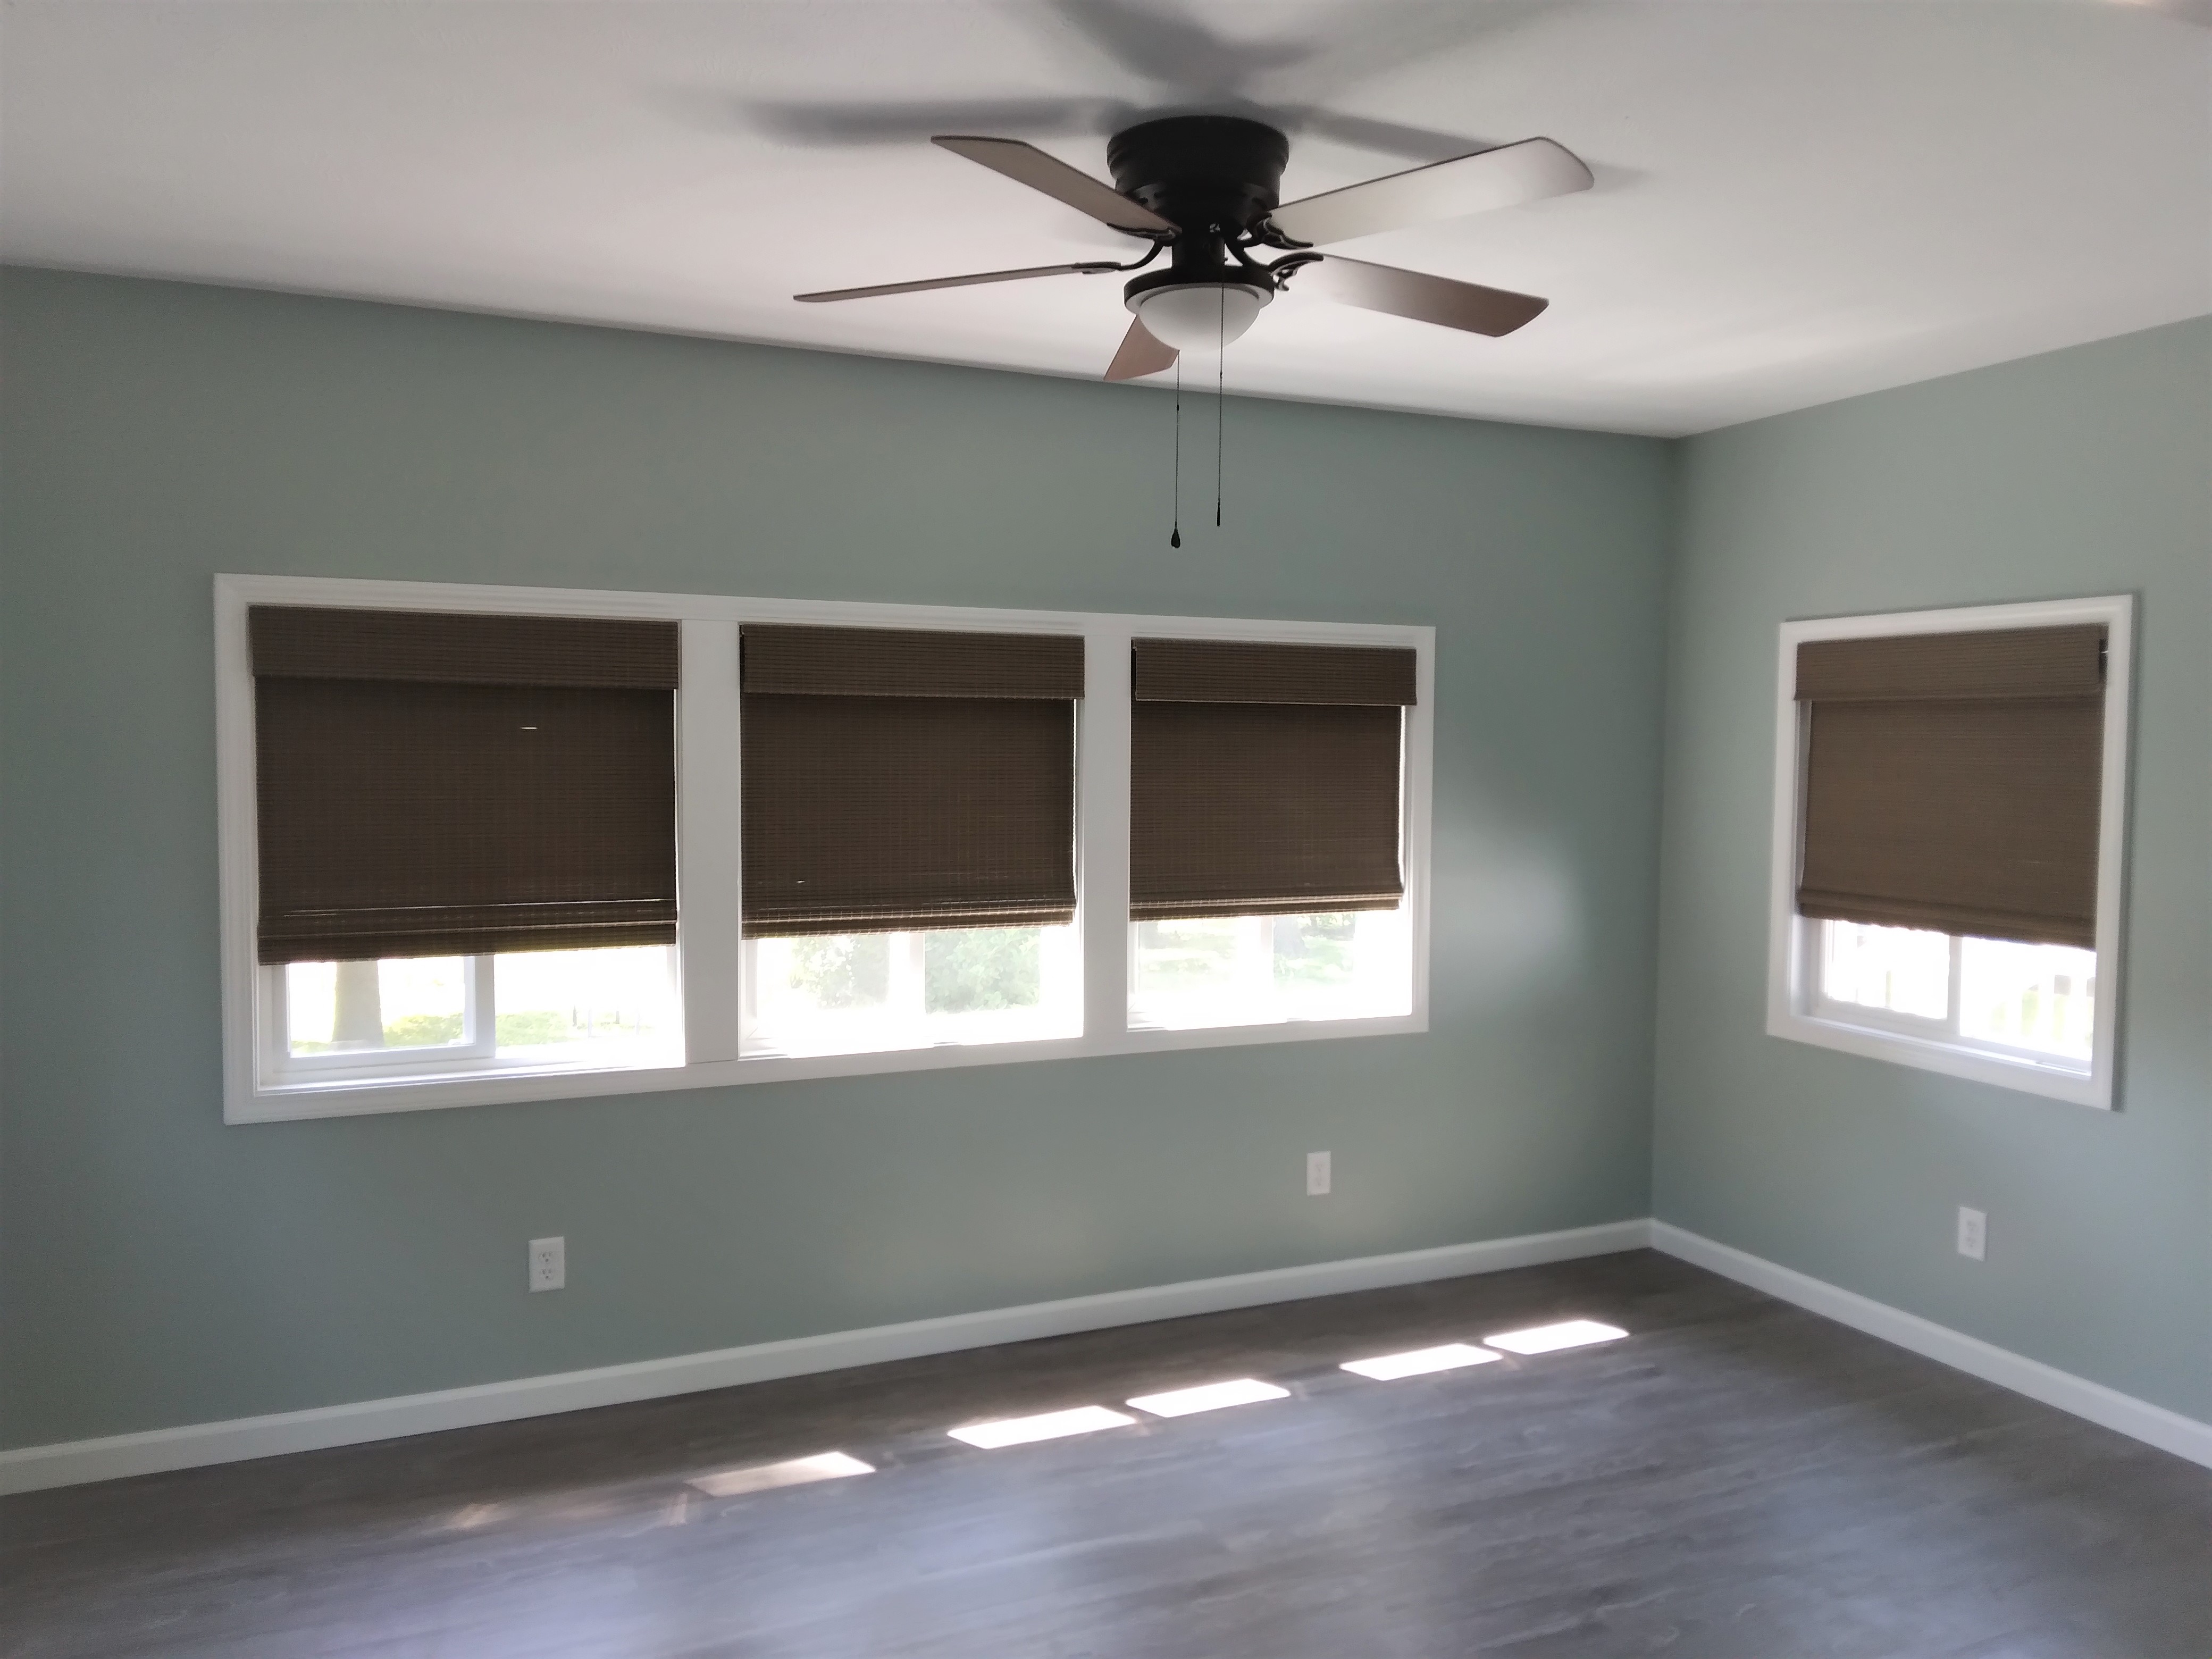 Cordless natural shades in Springfield Illinois sunroom.  BudgetBlinds  WindowCoverings  Shades  NaturalShades  SpringfieldIllinois